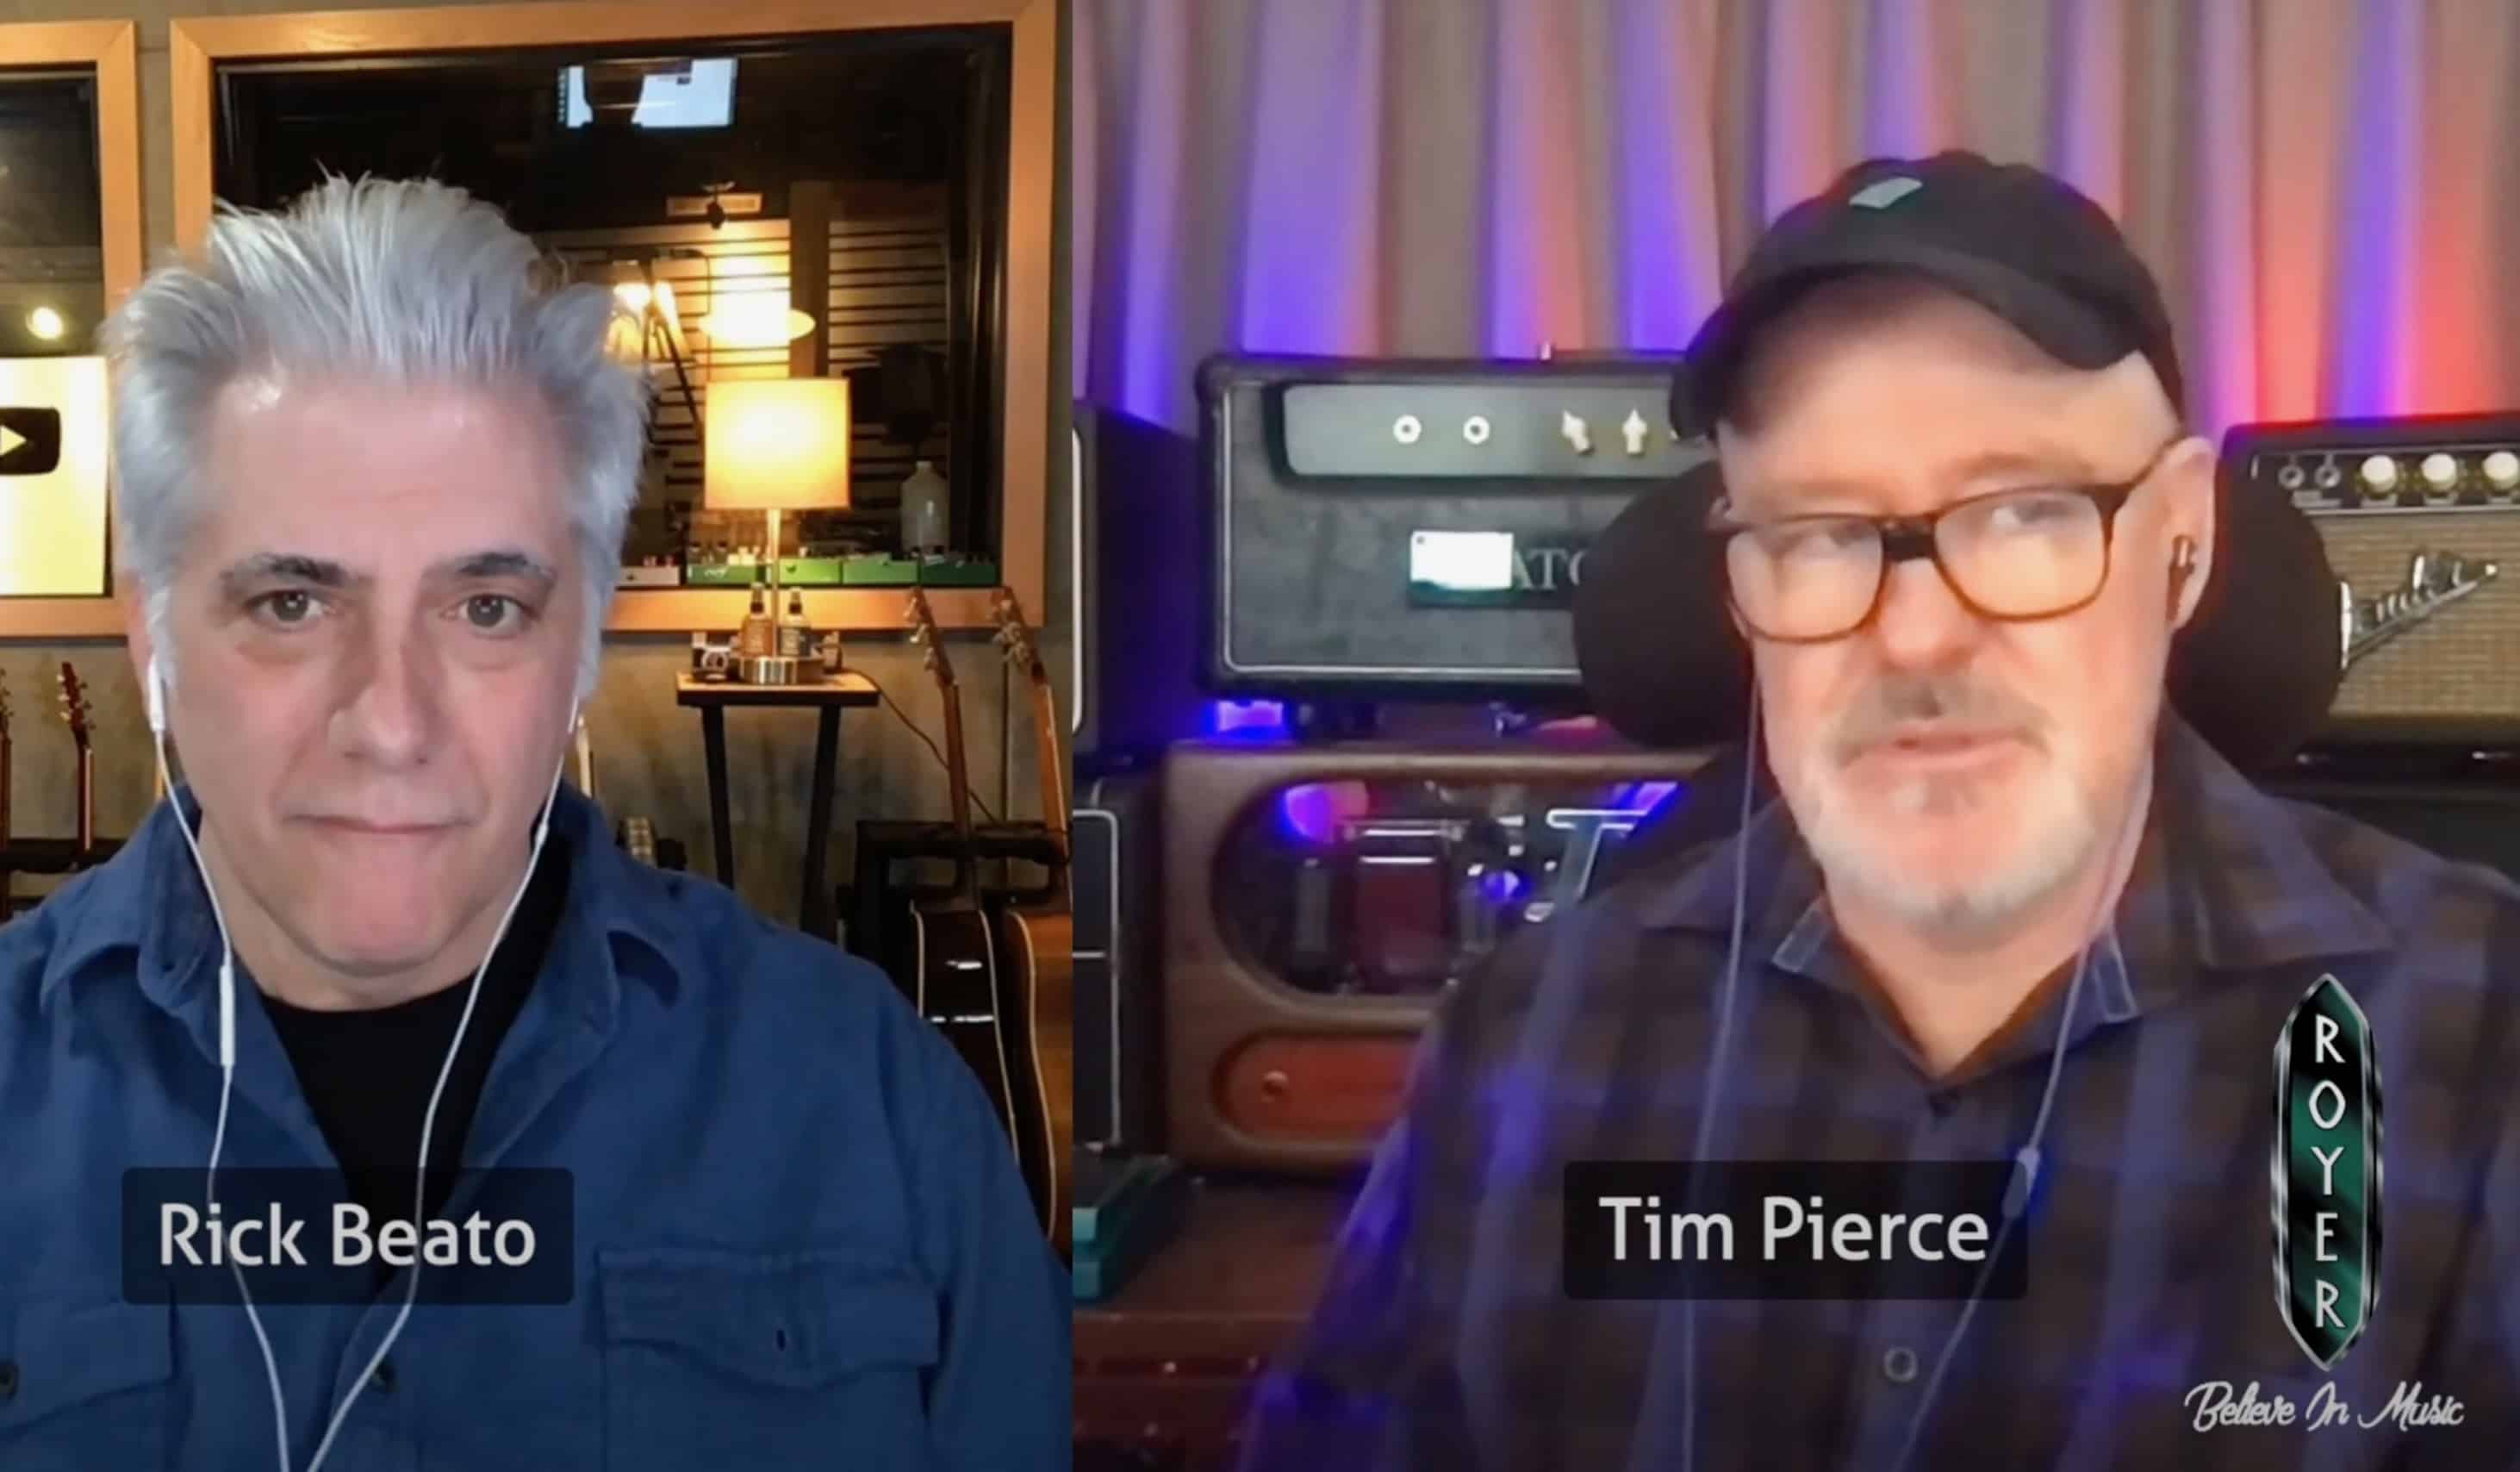 How To Record Electric Guitar Using A Ribbon Microphone: Tips From Tim Pierce And Rick Beato